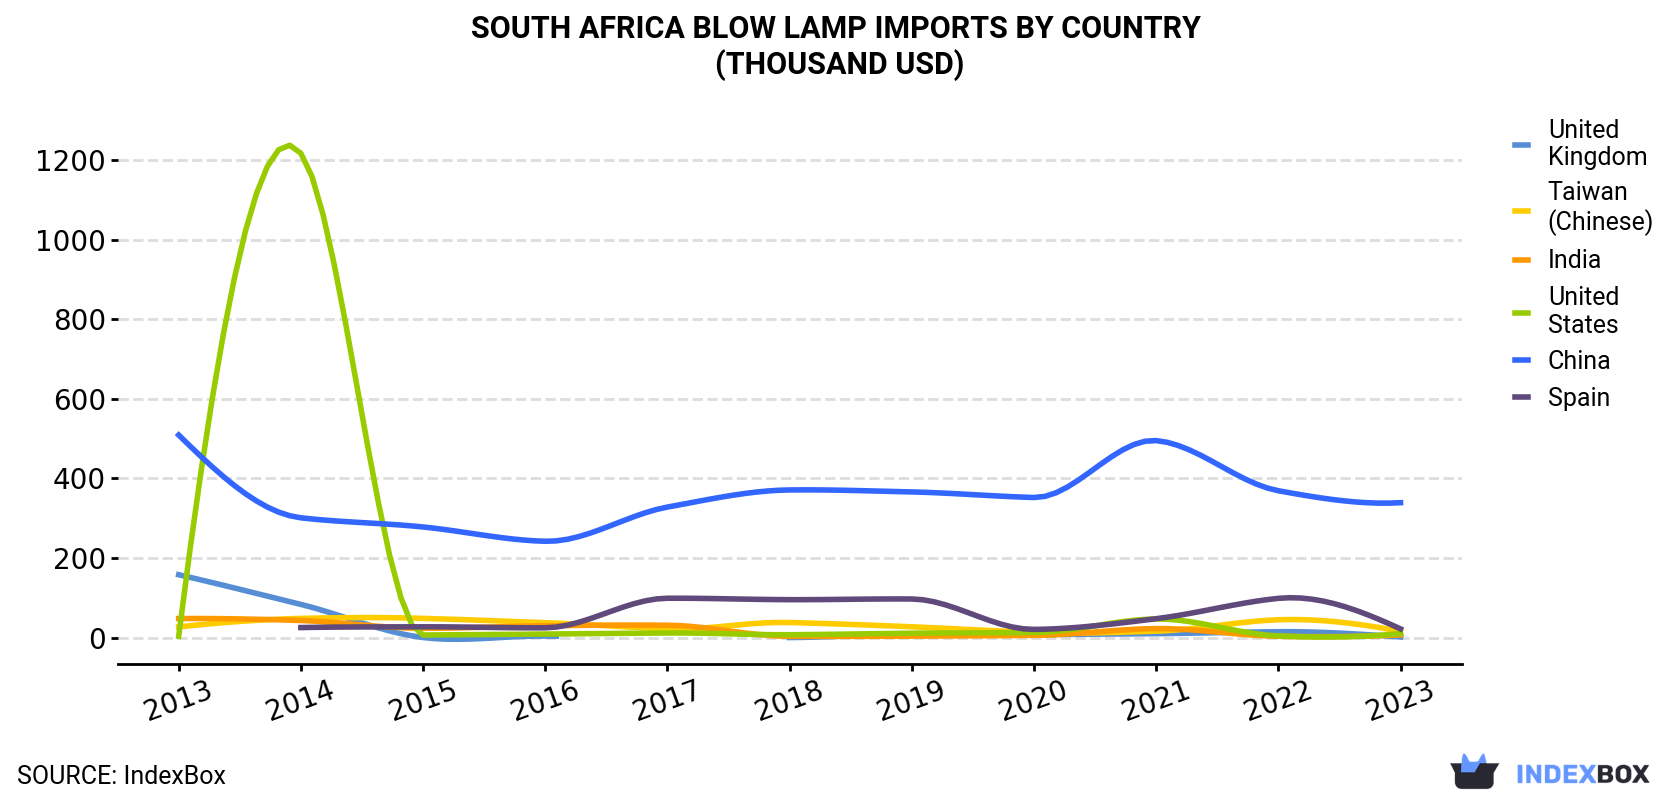 South Africa Blow Lamp Imports By Country (Thousand USD)